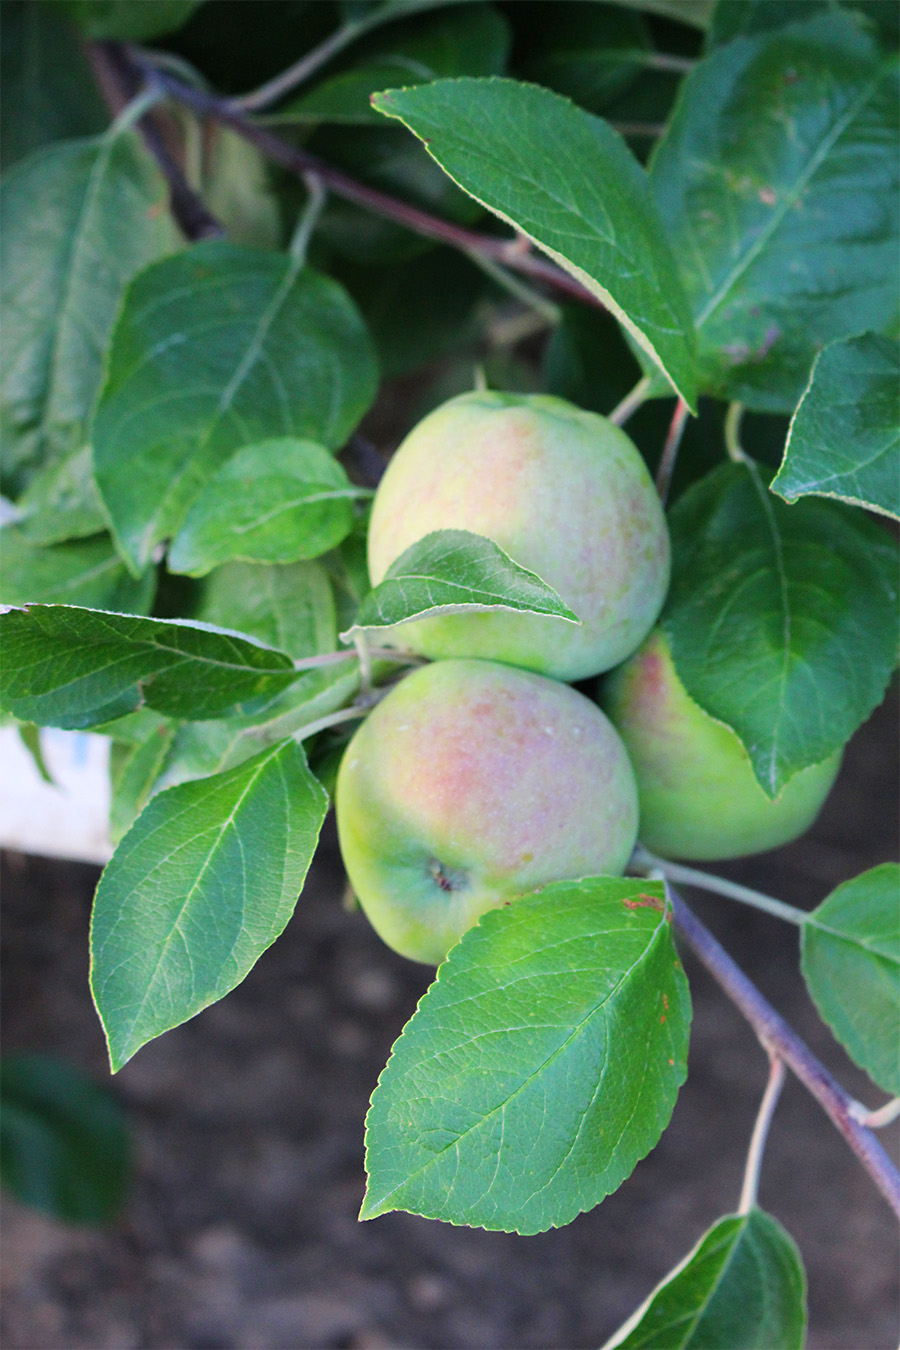 These young Cortland apples at Butternut Farm in Farmington, New Hampshire, will not develop their full color until September. (Russell Steven Powell photo)